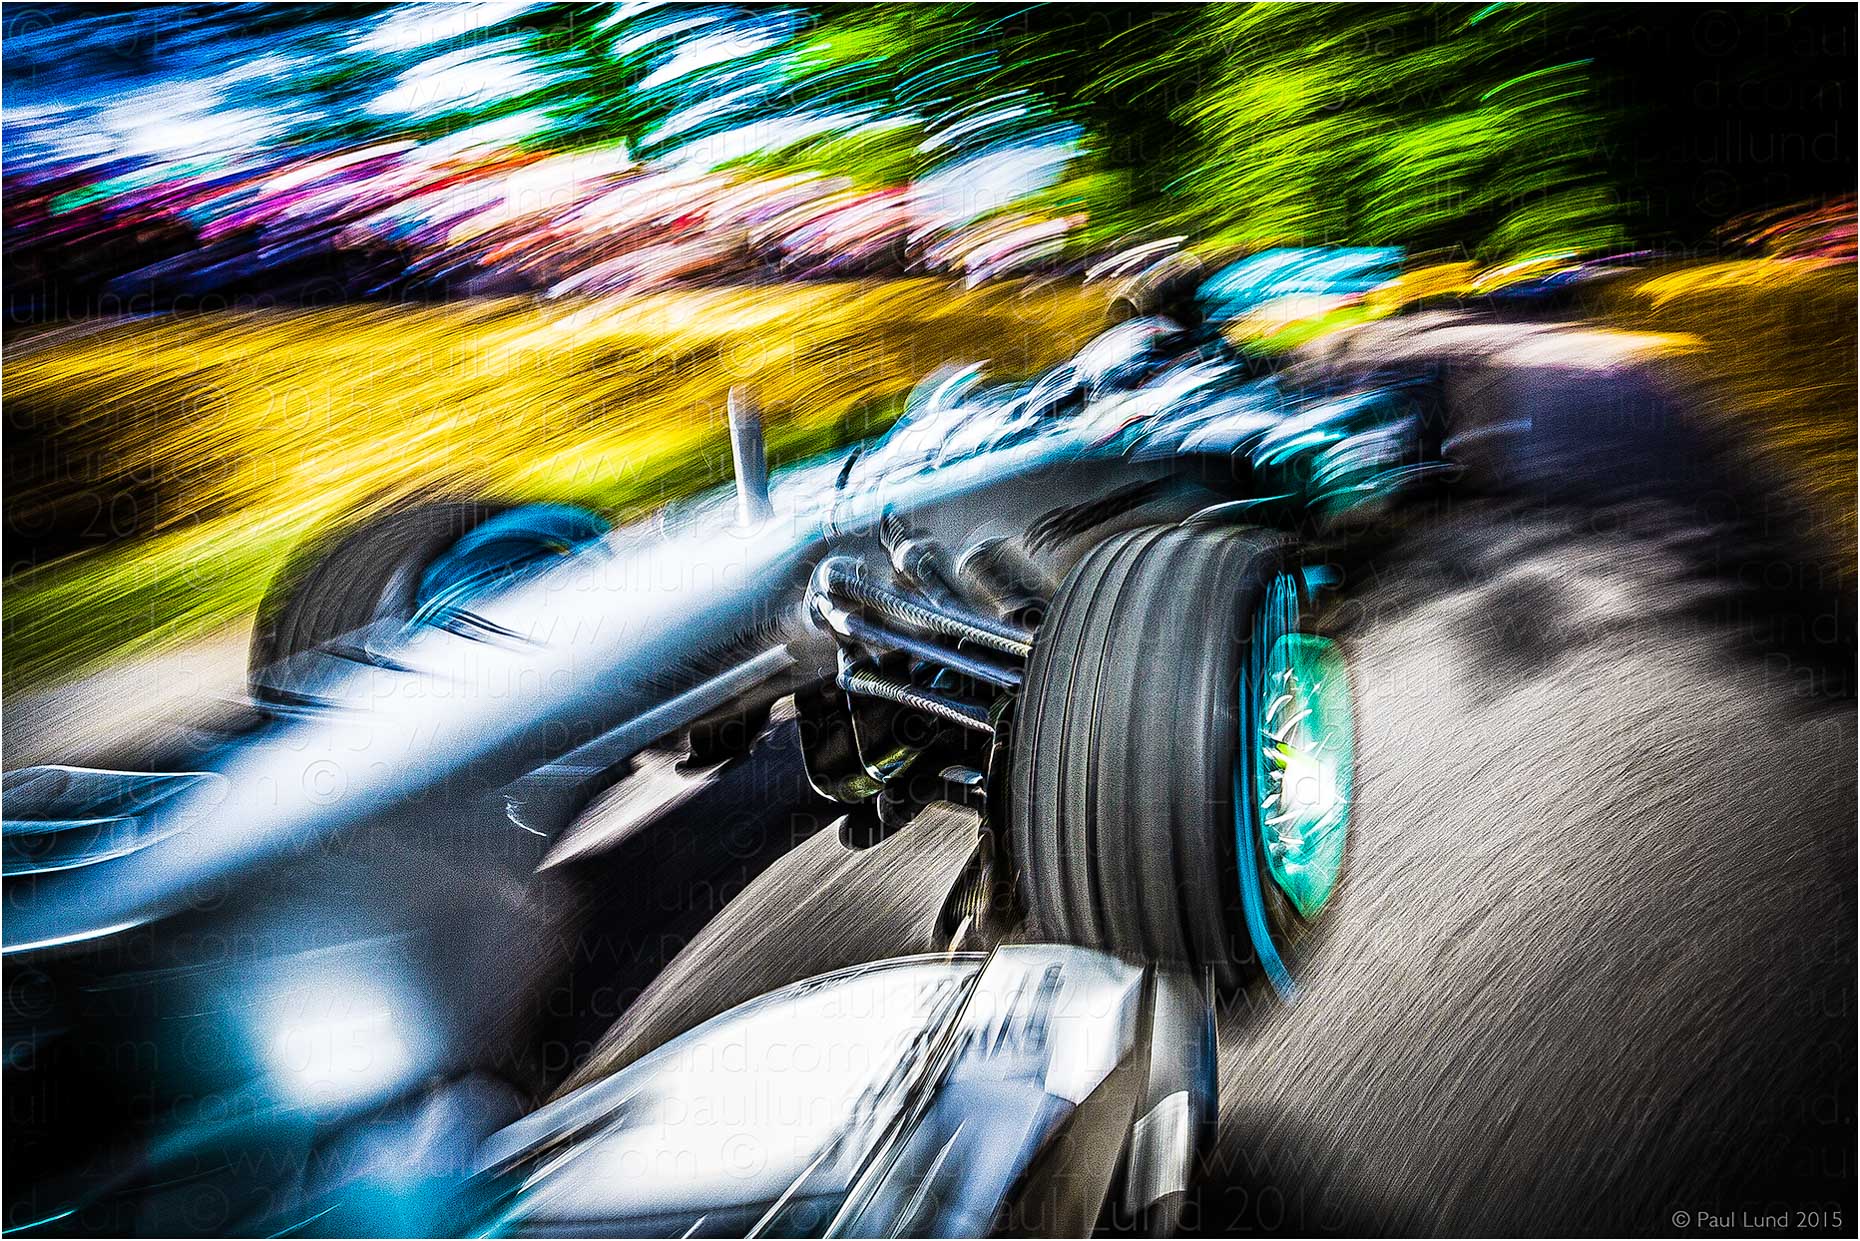 Mercedes MGP W04 at Goodwood Festival of Speed 2015. Photographer: Paul Lund